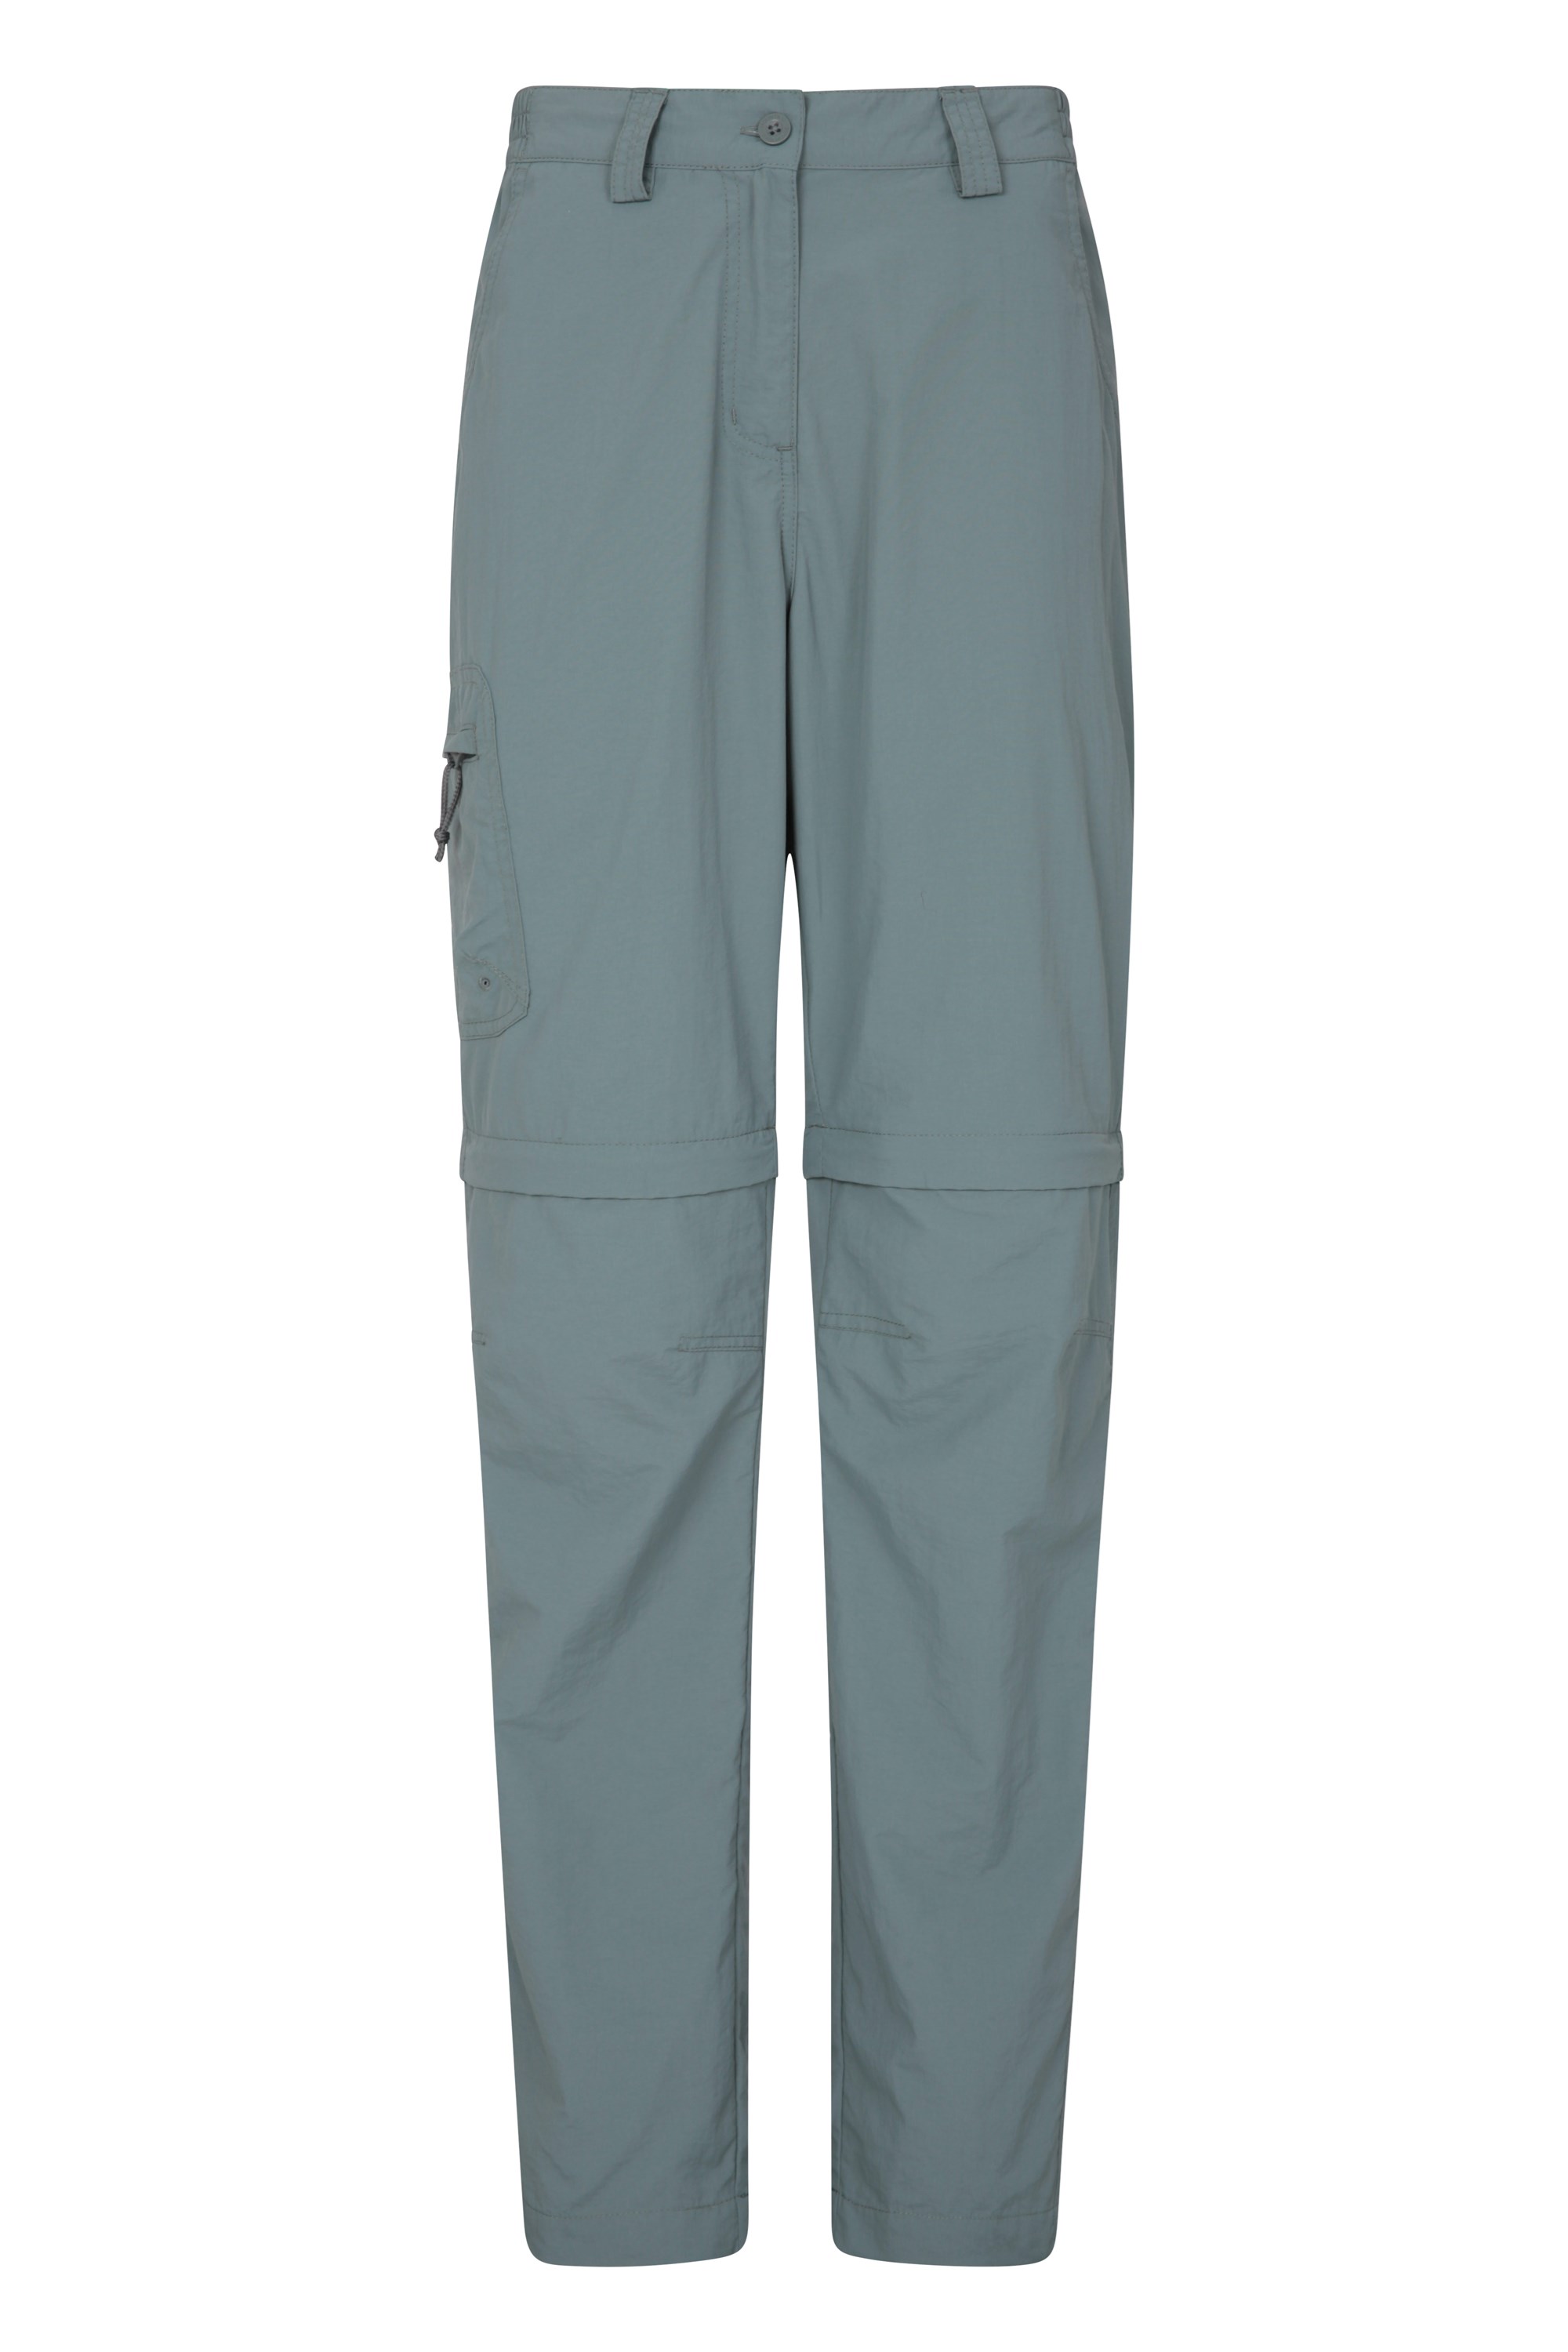 Lightweight Spring Pants Mountain Warehouse Explore Womens Trousers 